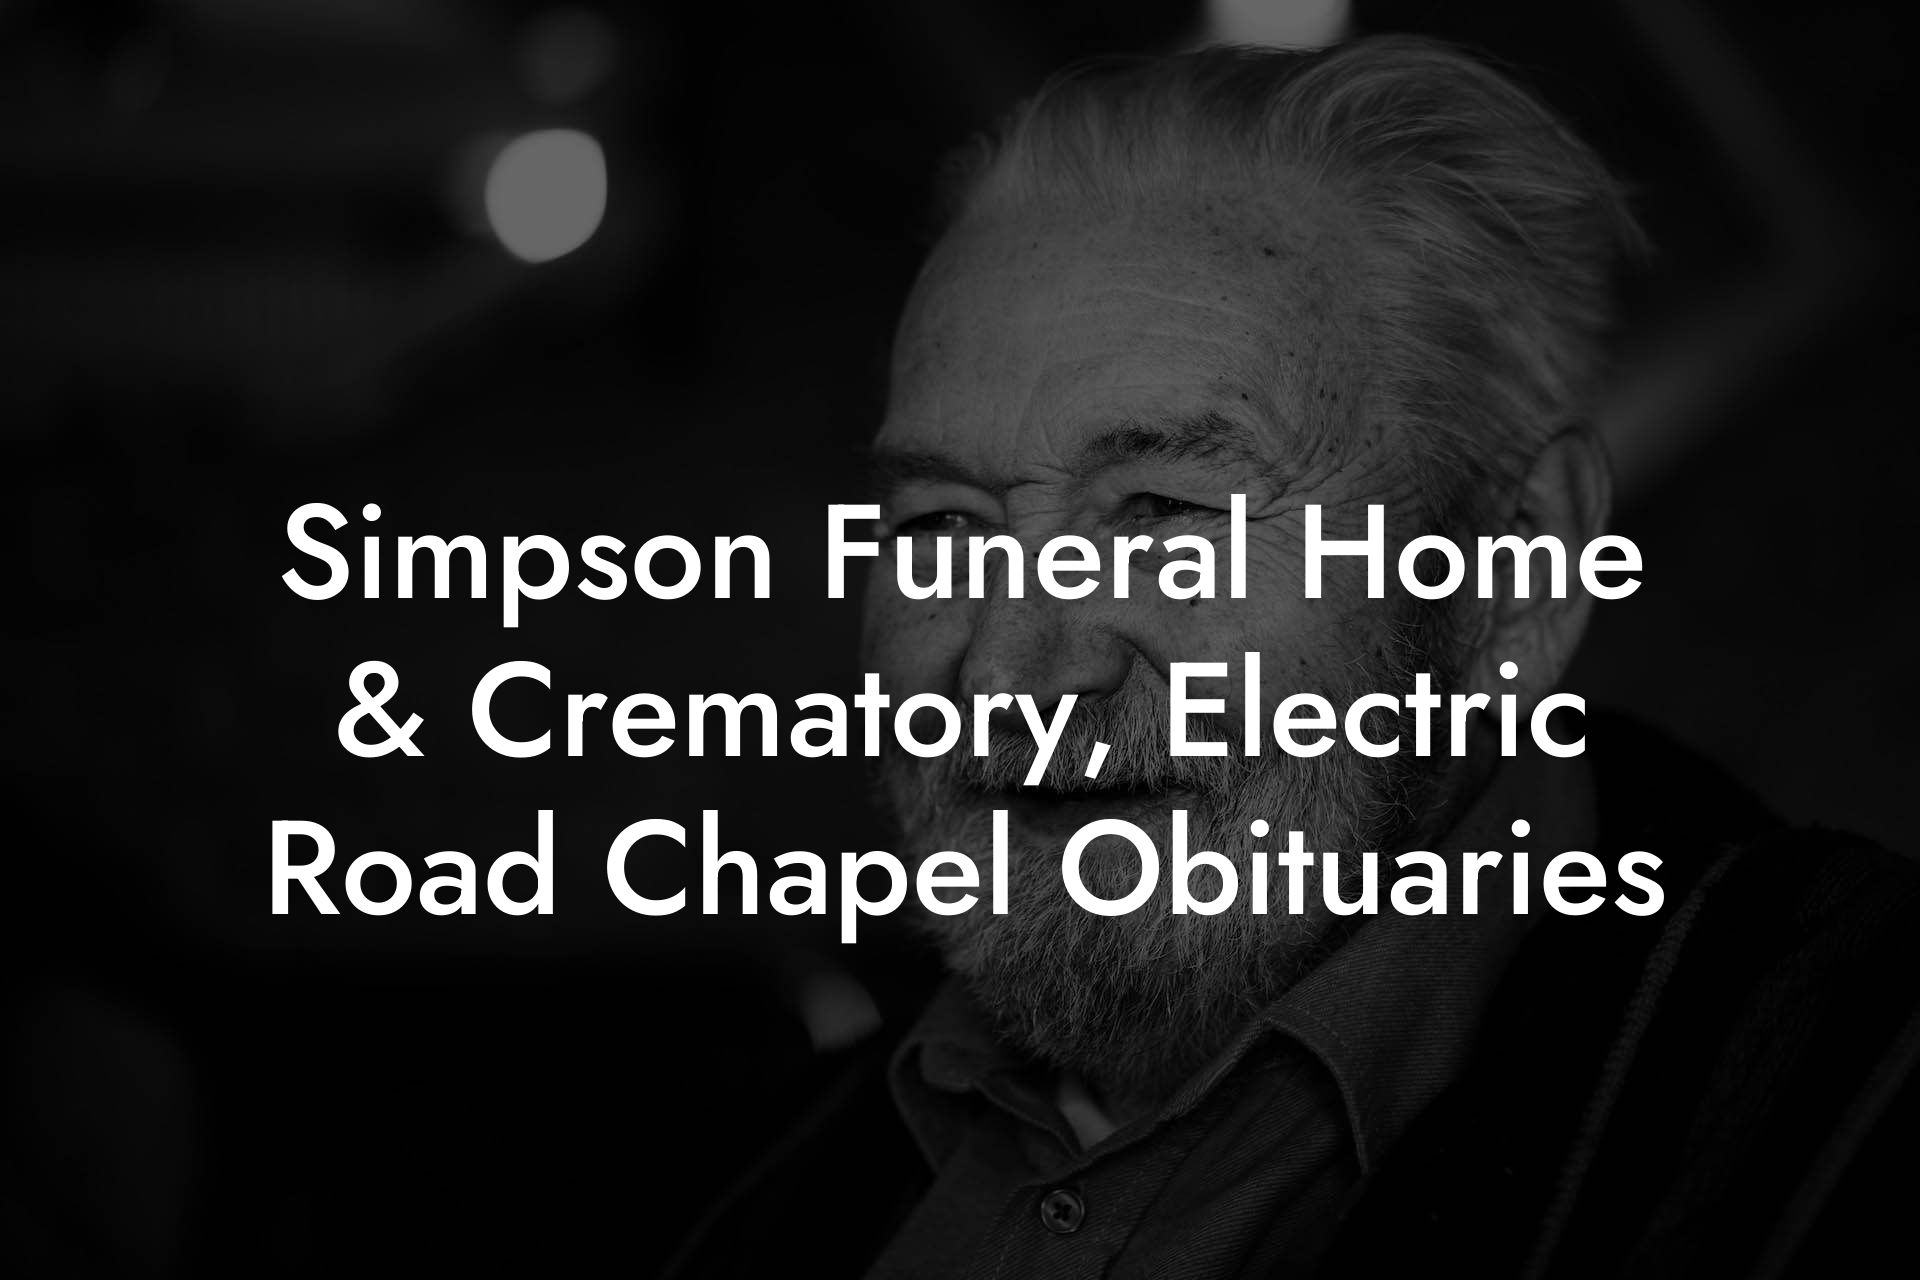 Simpson Funeral Home & Crematory, Electric Road Chapel Obituaries